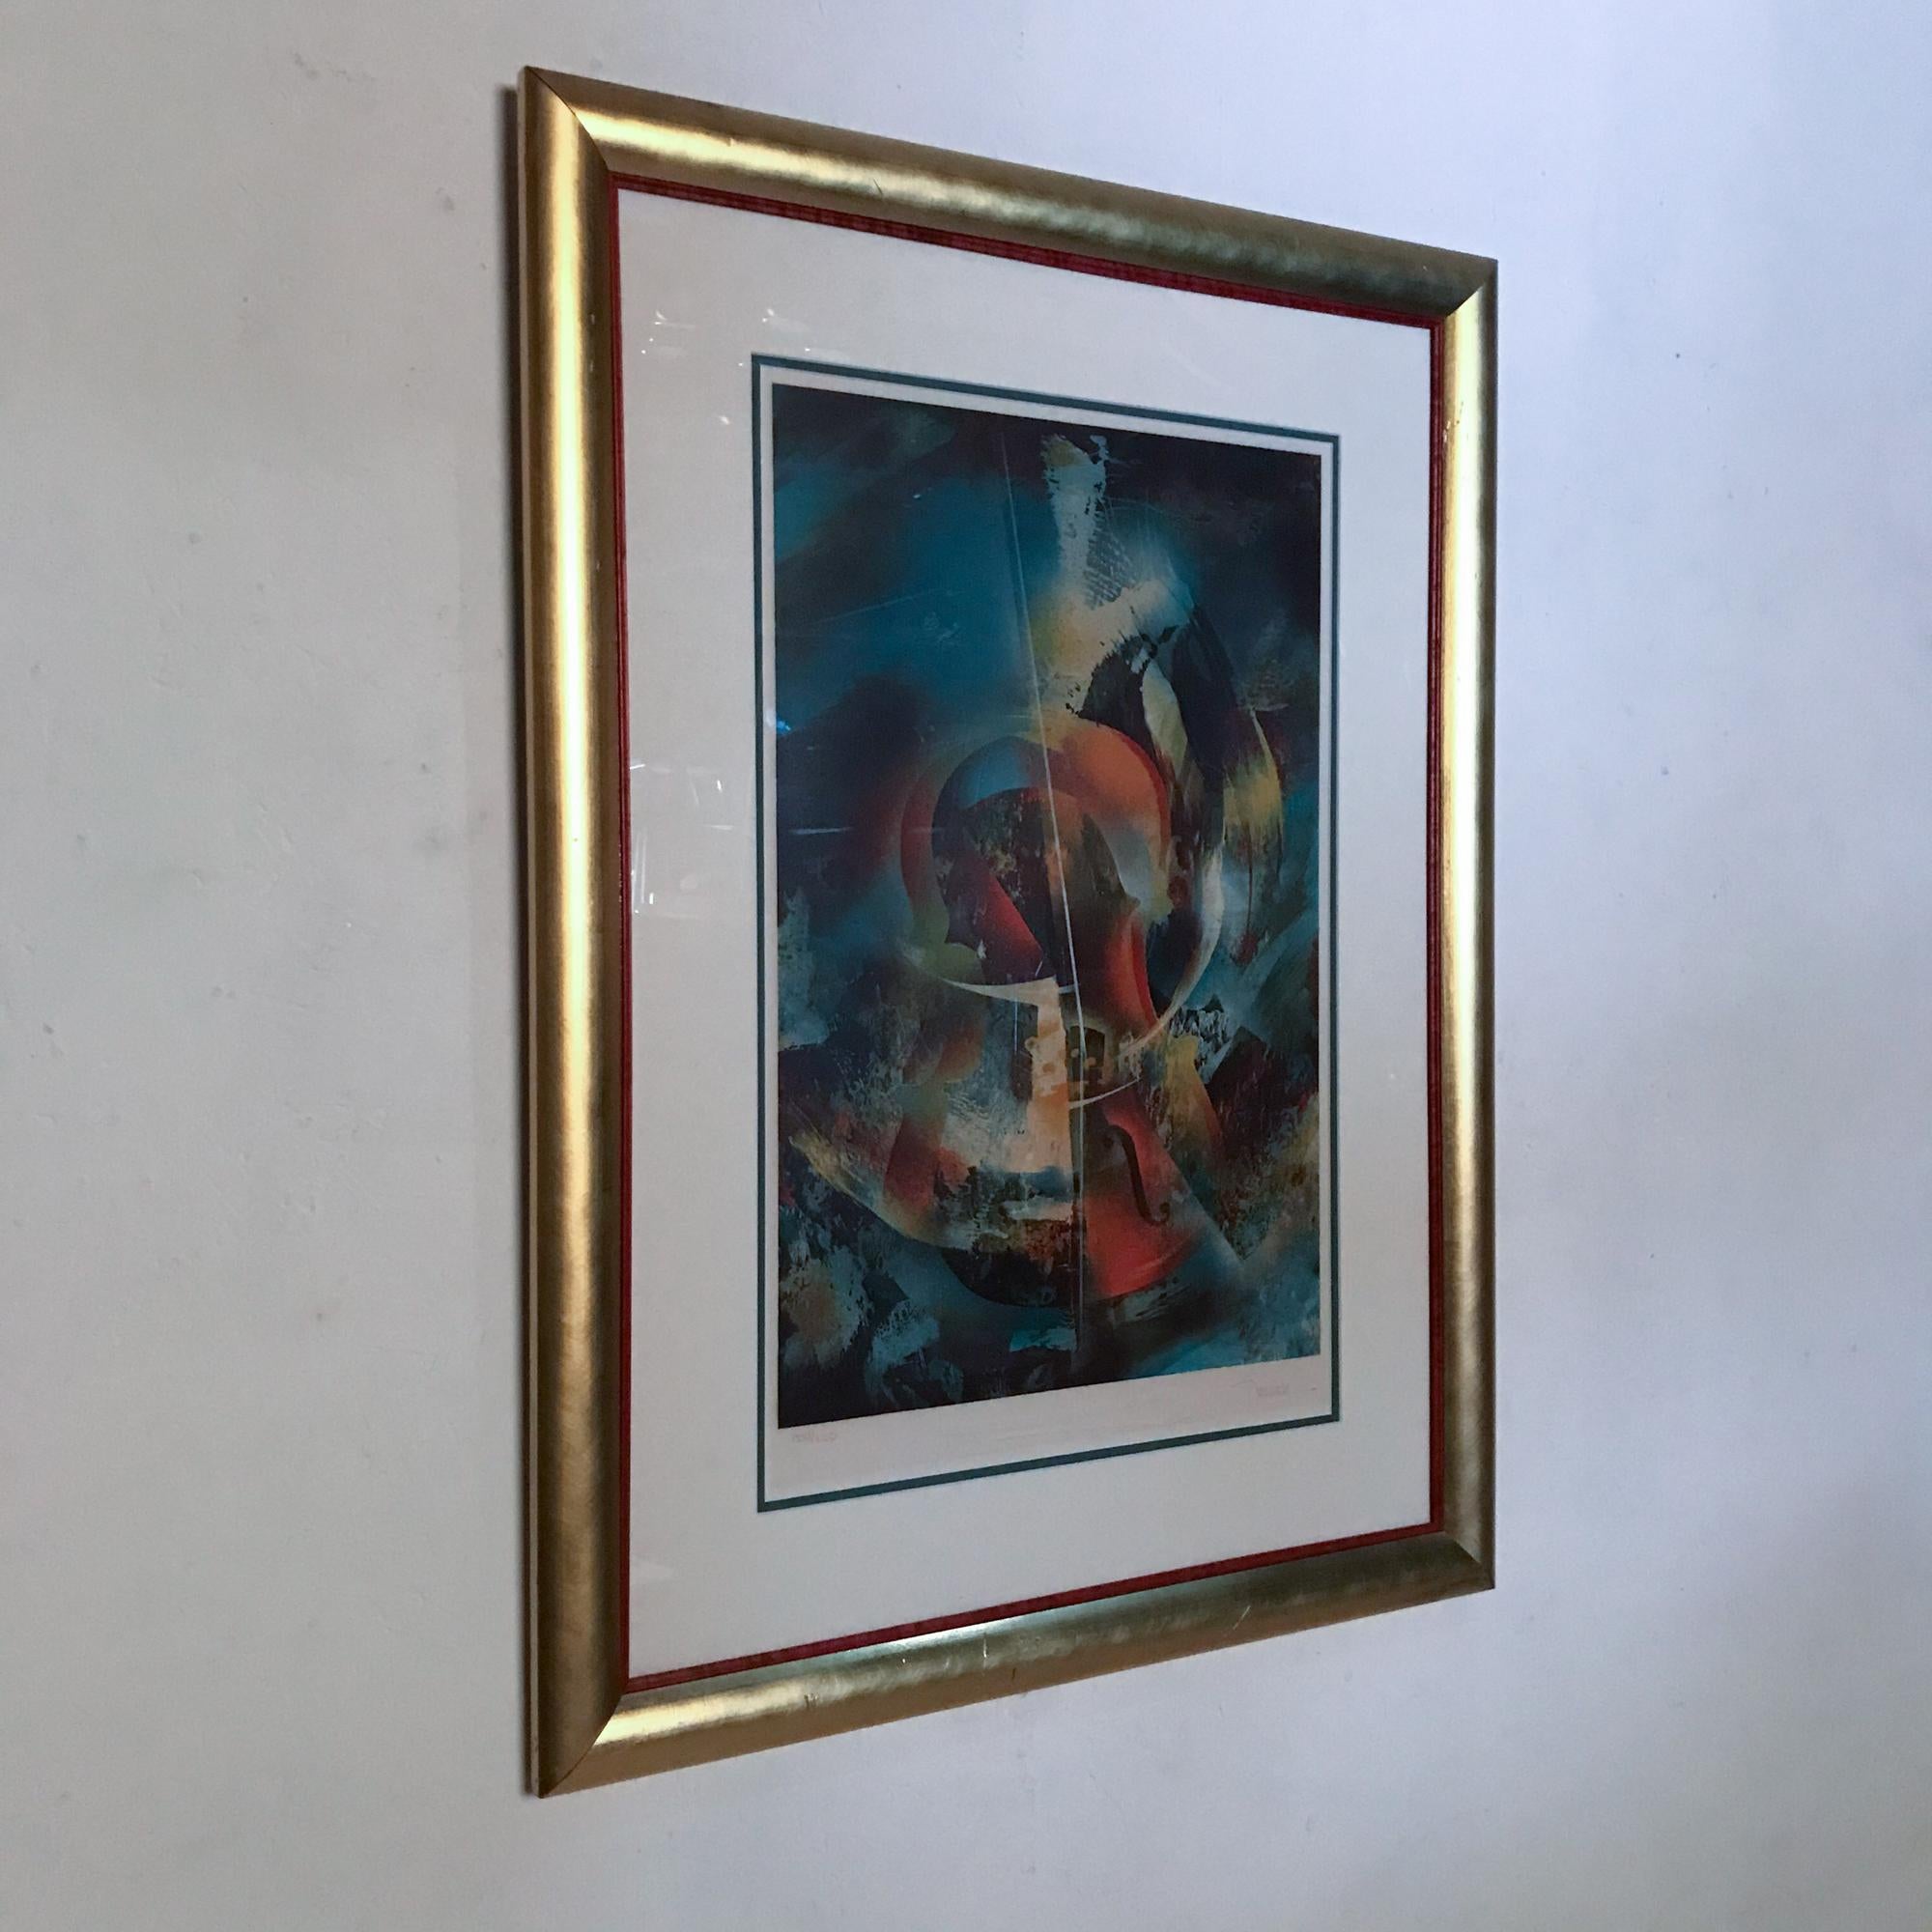 For your consideration, a vintage lithography by Leonardo Nierman. Signed on pencil in the lower right. Inscription in the lower left “154/200”.
Beautiful abstract with dominant blue color. Original frame with gold leaf.
Made in Mexico Circa the